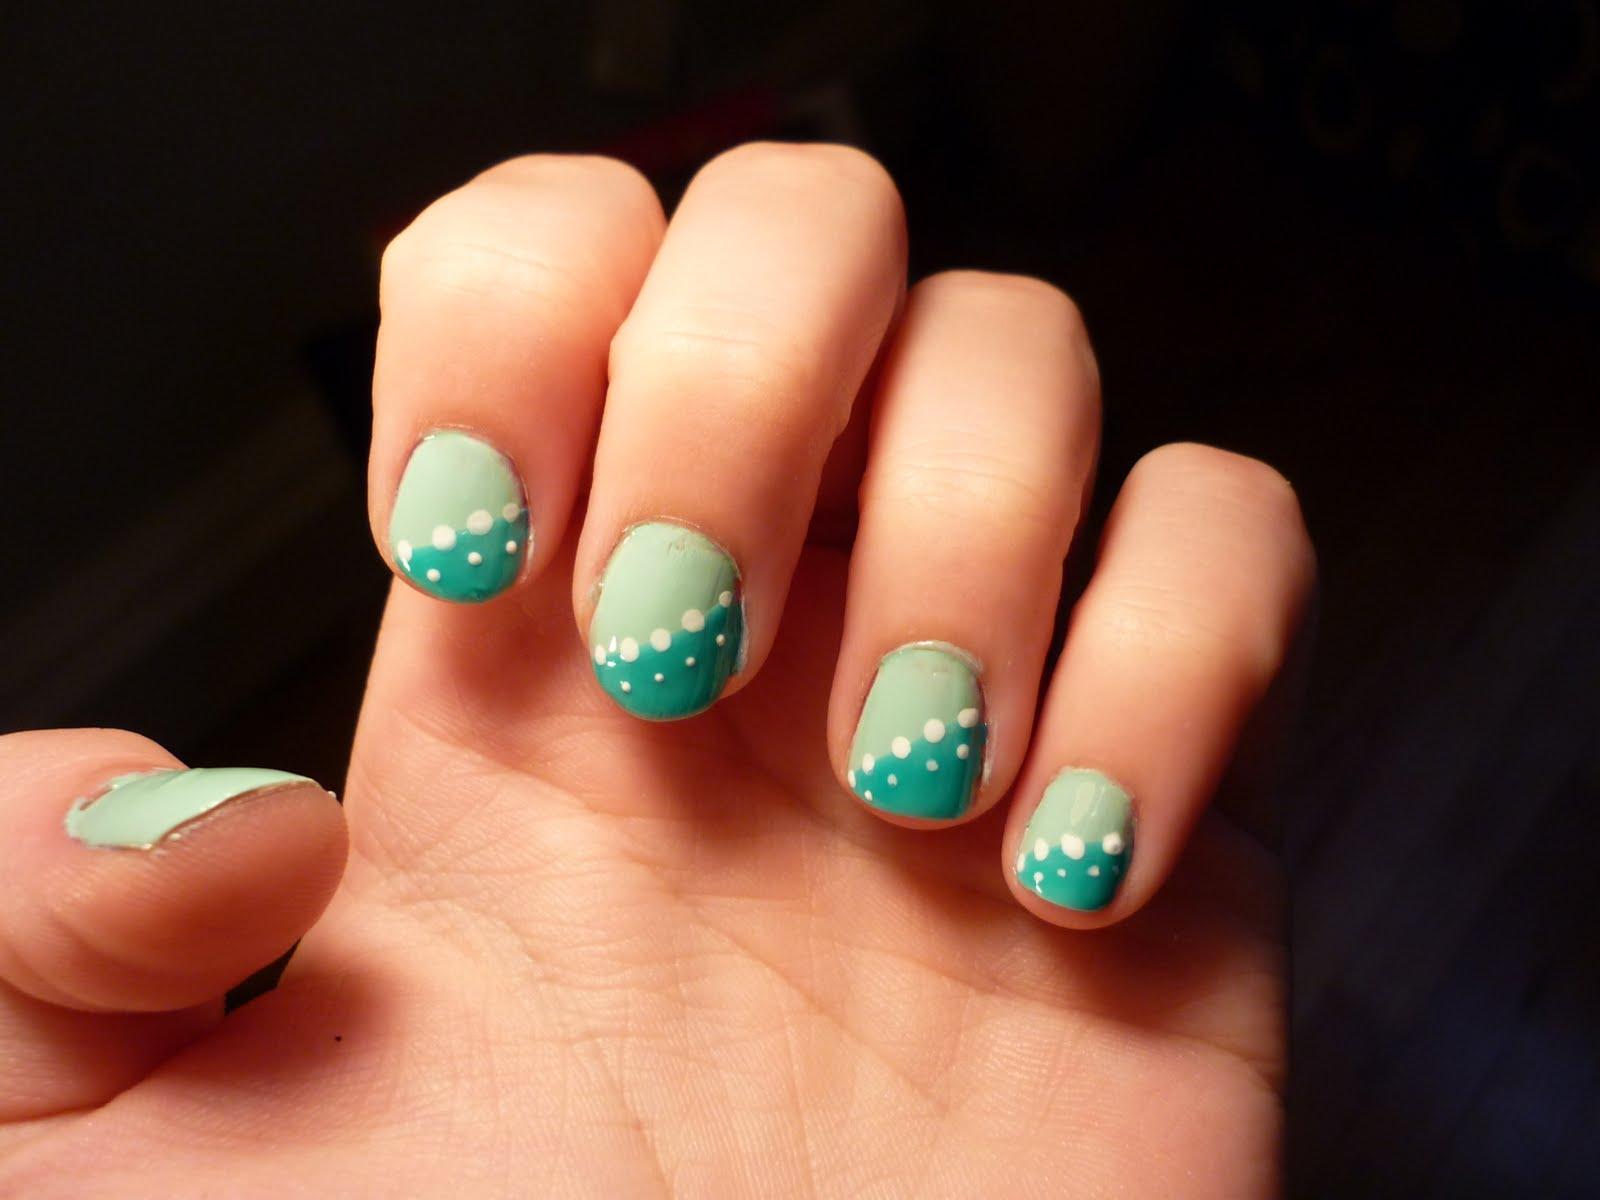 1. Summer Nail Designs: 20 Cute Ideas You'll Want to Copy - wide 1